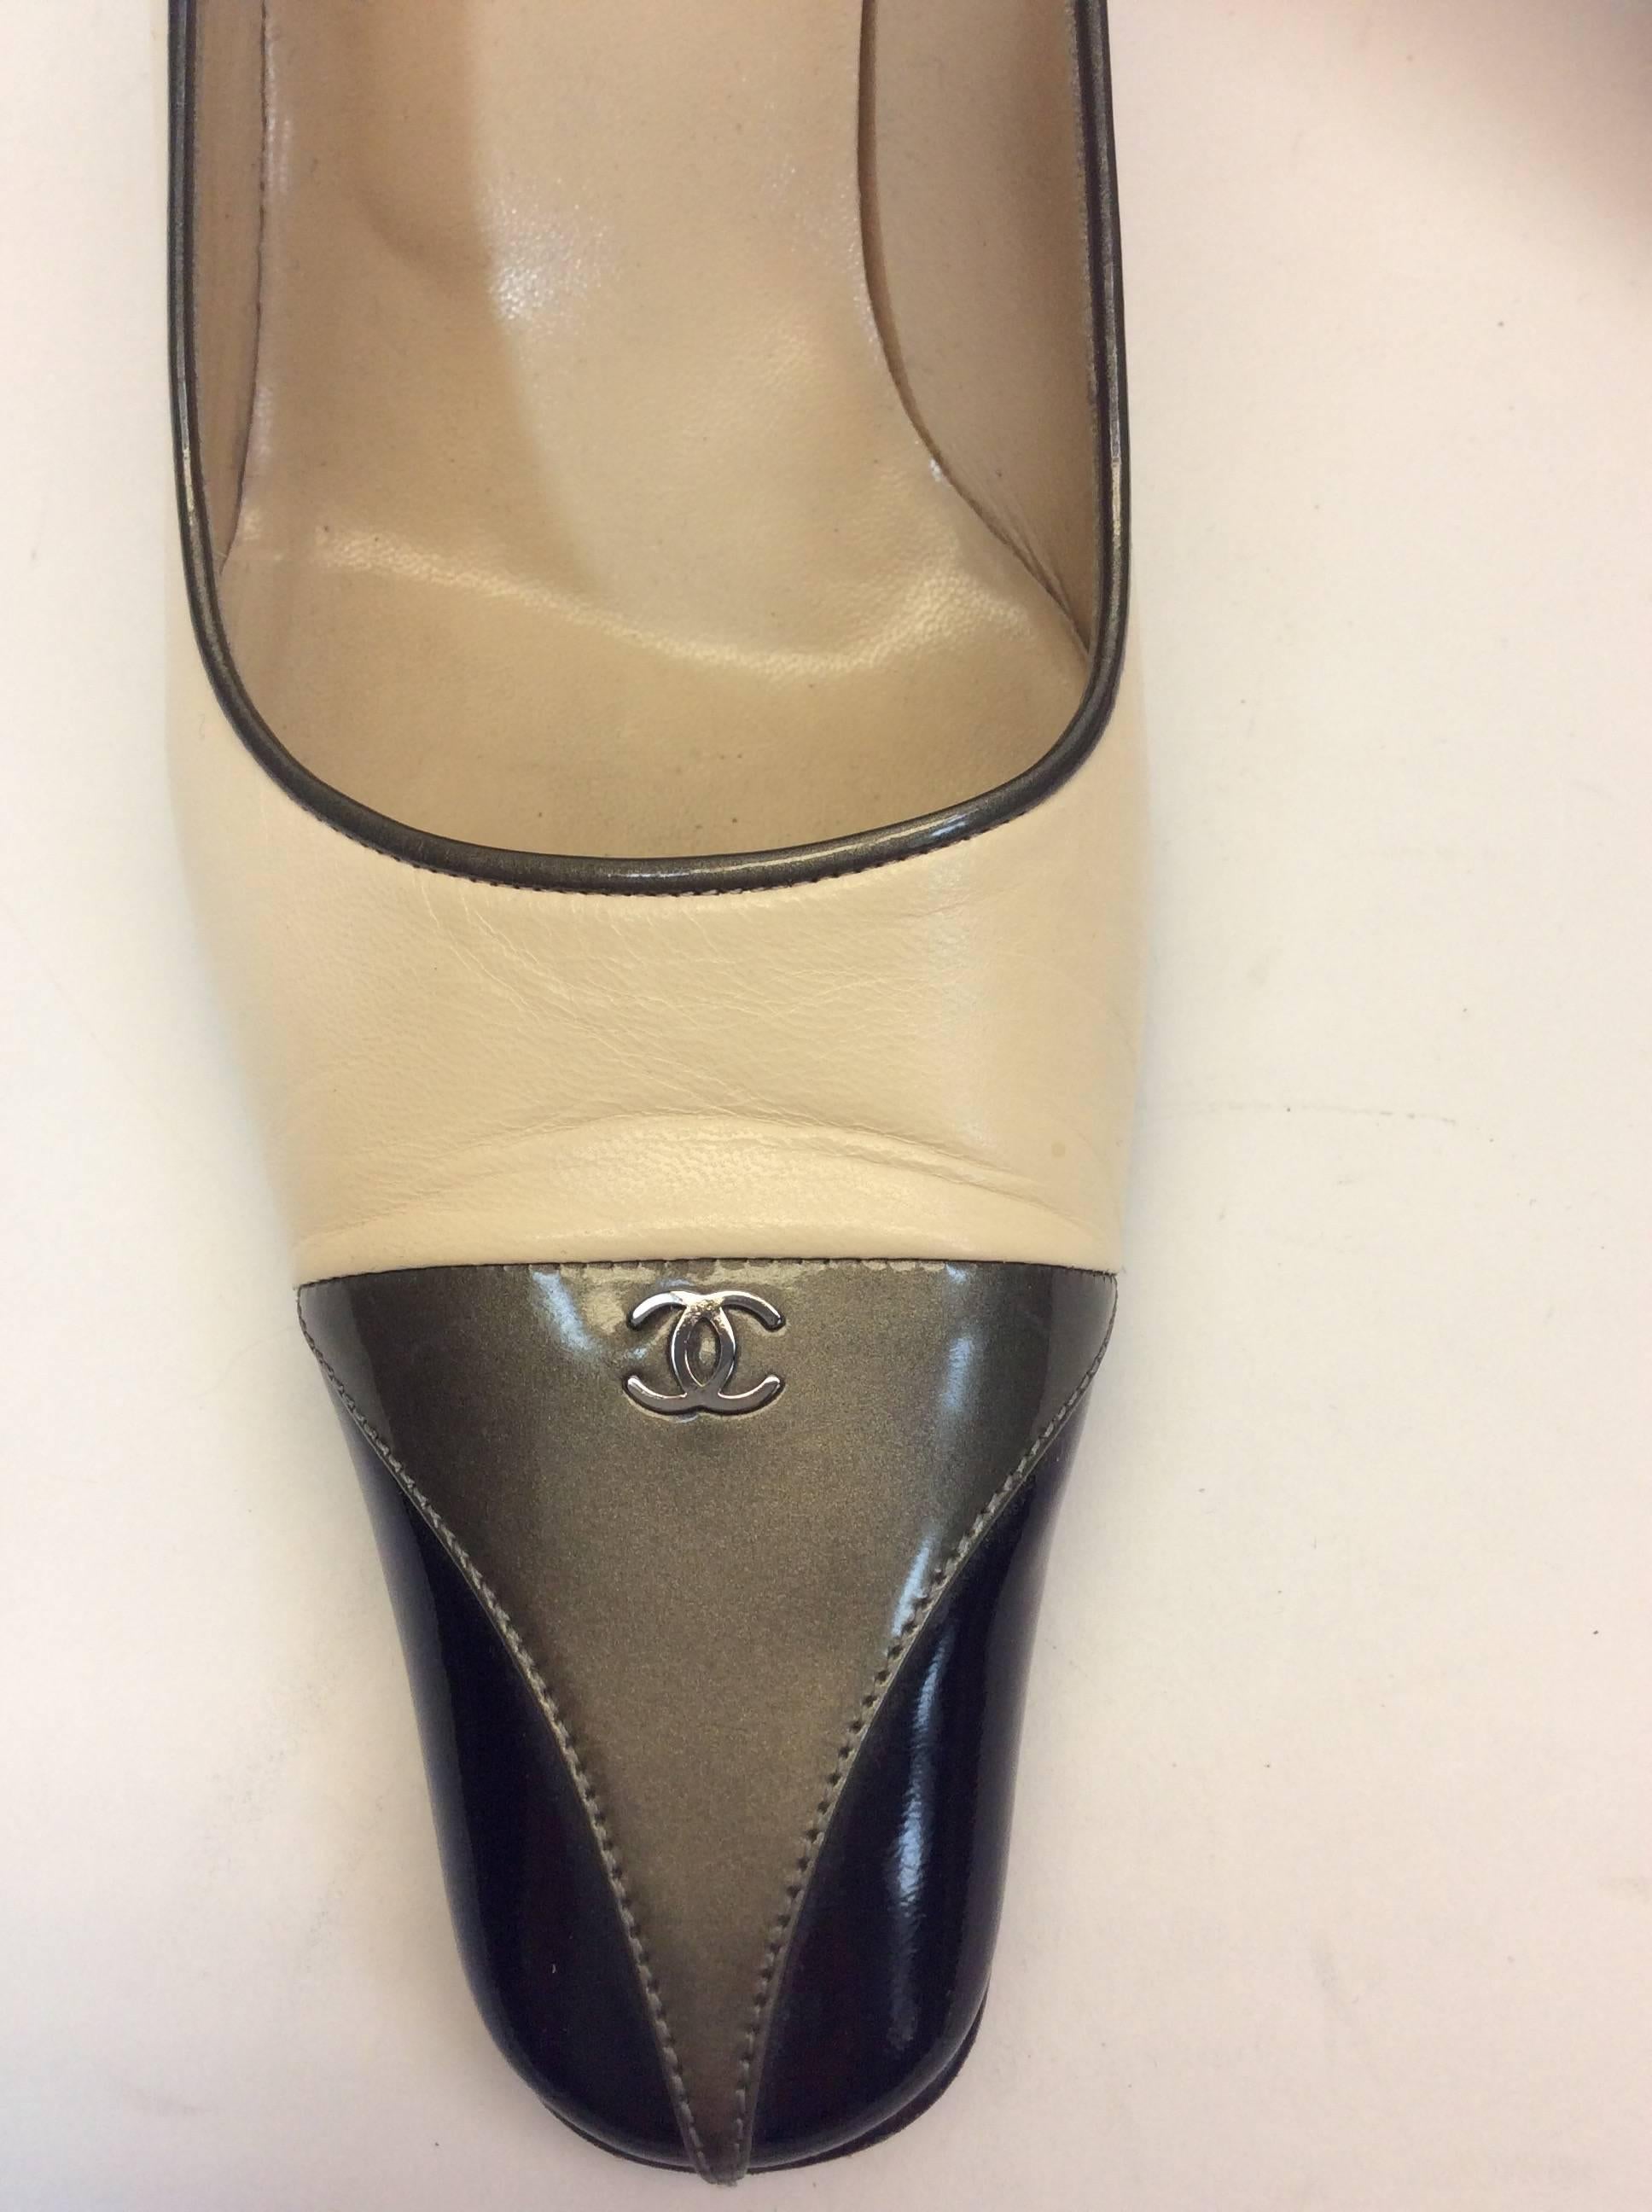 Chanel Tan Leather with Patent Leather Olive/Black Cap Toe Heel  For Sale 4